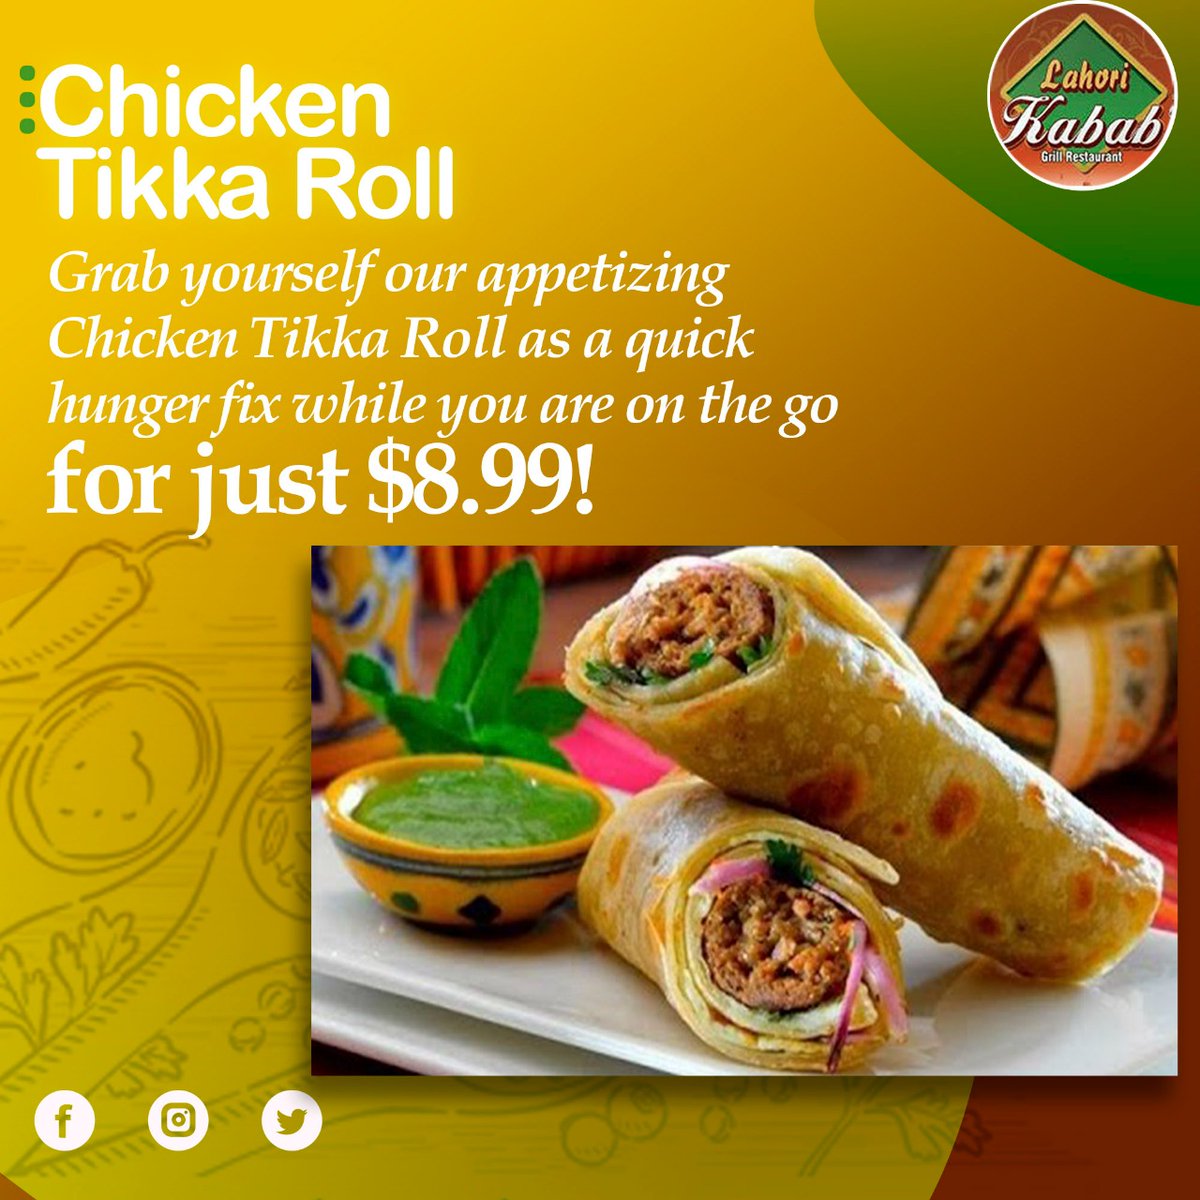 Grab yourself our appetizing Chicken Tikka Roll as a quick hunger fix while you are on the go for just $8.99!

Call us Now: +1 (717) 547-6062
Visit us Now:3840 Union Deposit Rd, Harrisburg, PA 17109
#lahorikababandgrill #quick #ChickenTikkaRoll #fix #hunger #Lahoriflavors #friday